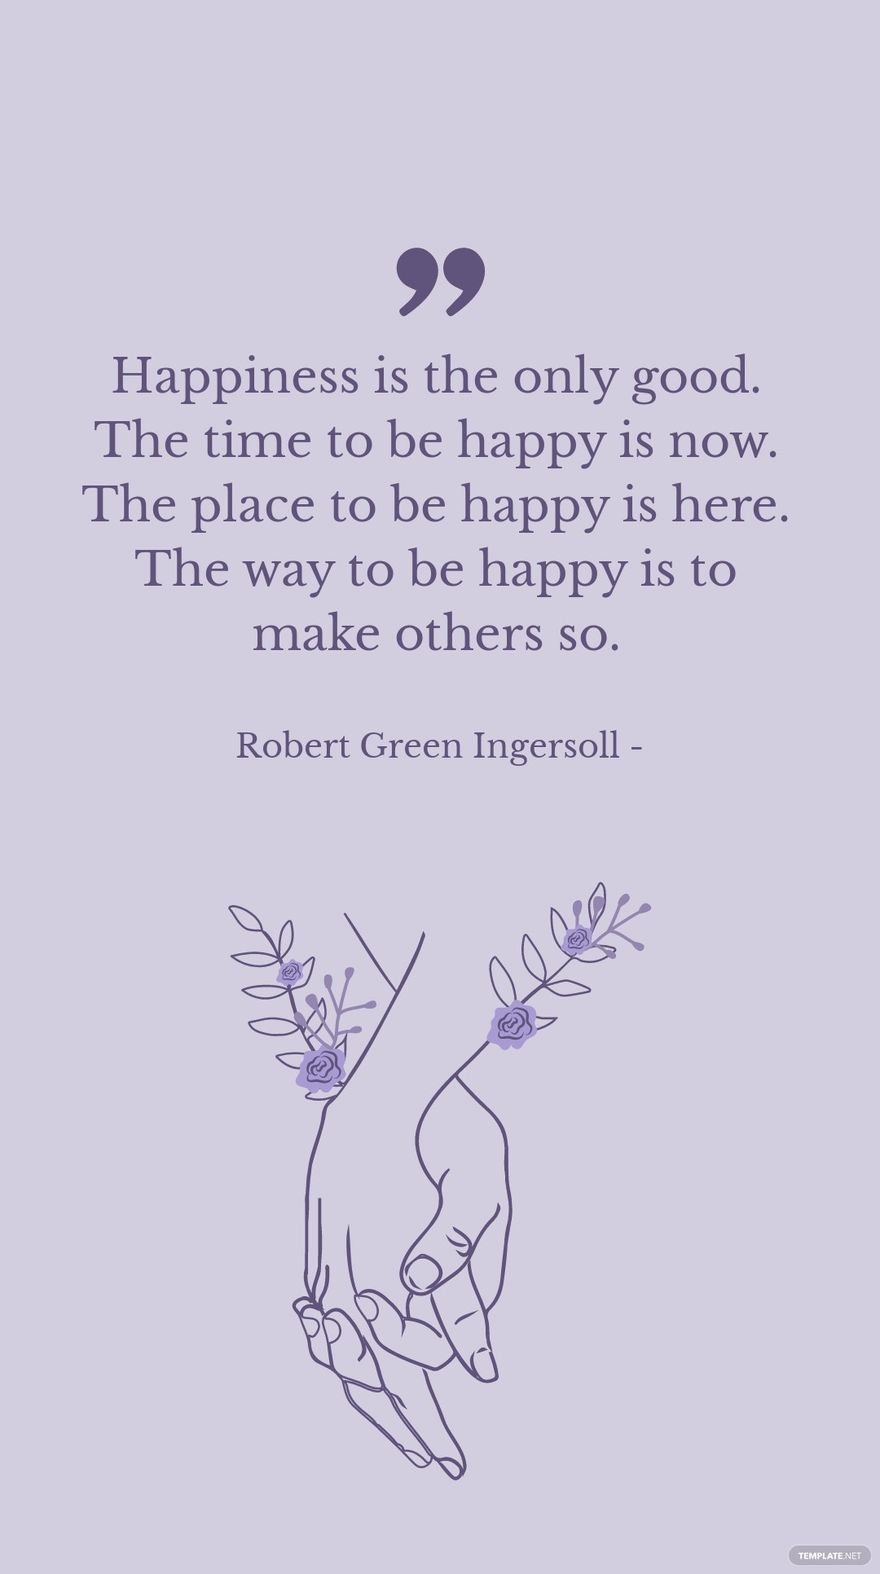 Robert Green Ingersoll - Happiness is the only good. The time to be happy is now. The place to be happy is here. The way to be happy is to make others so.